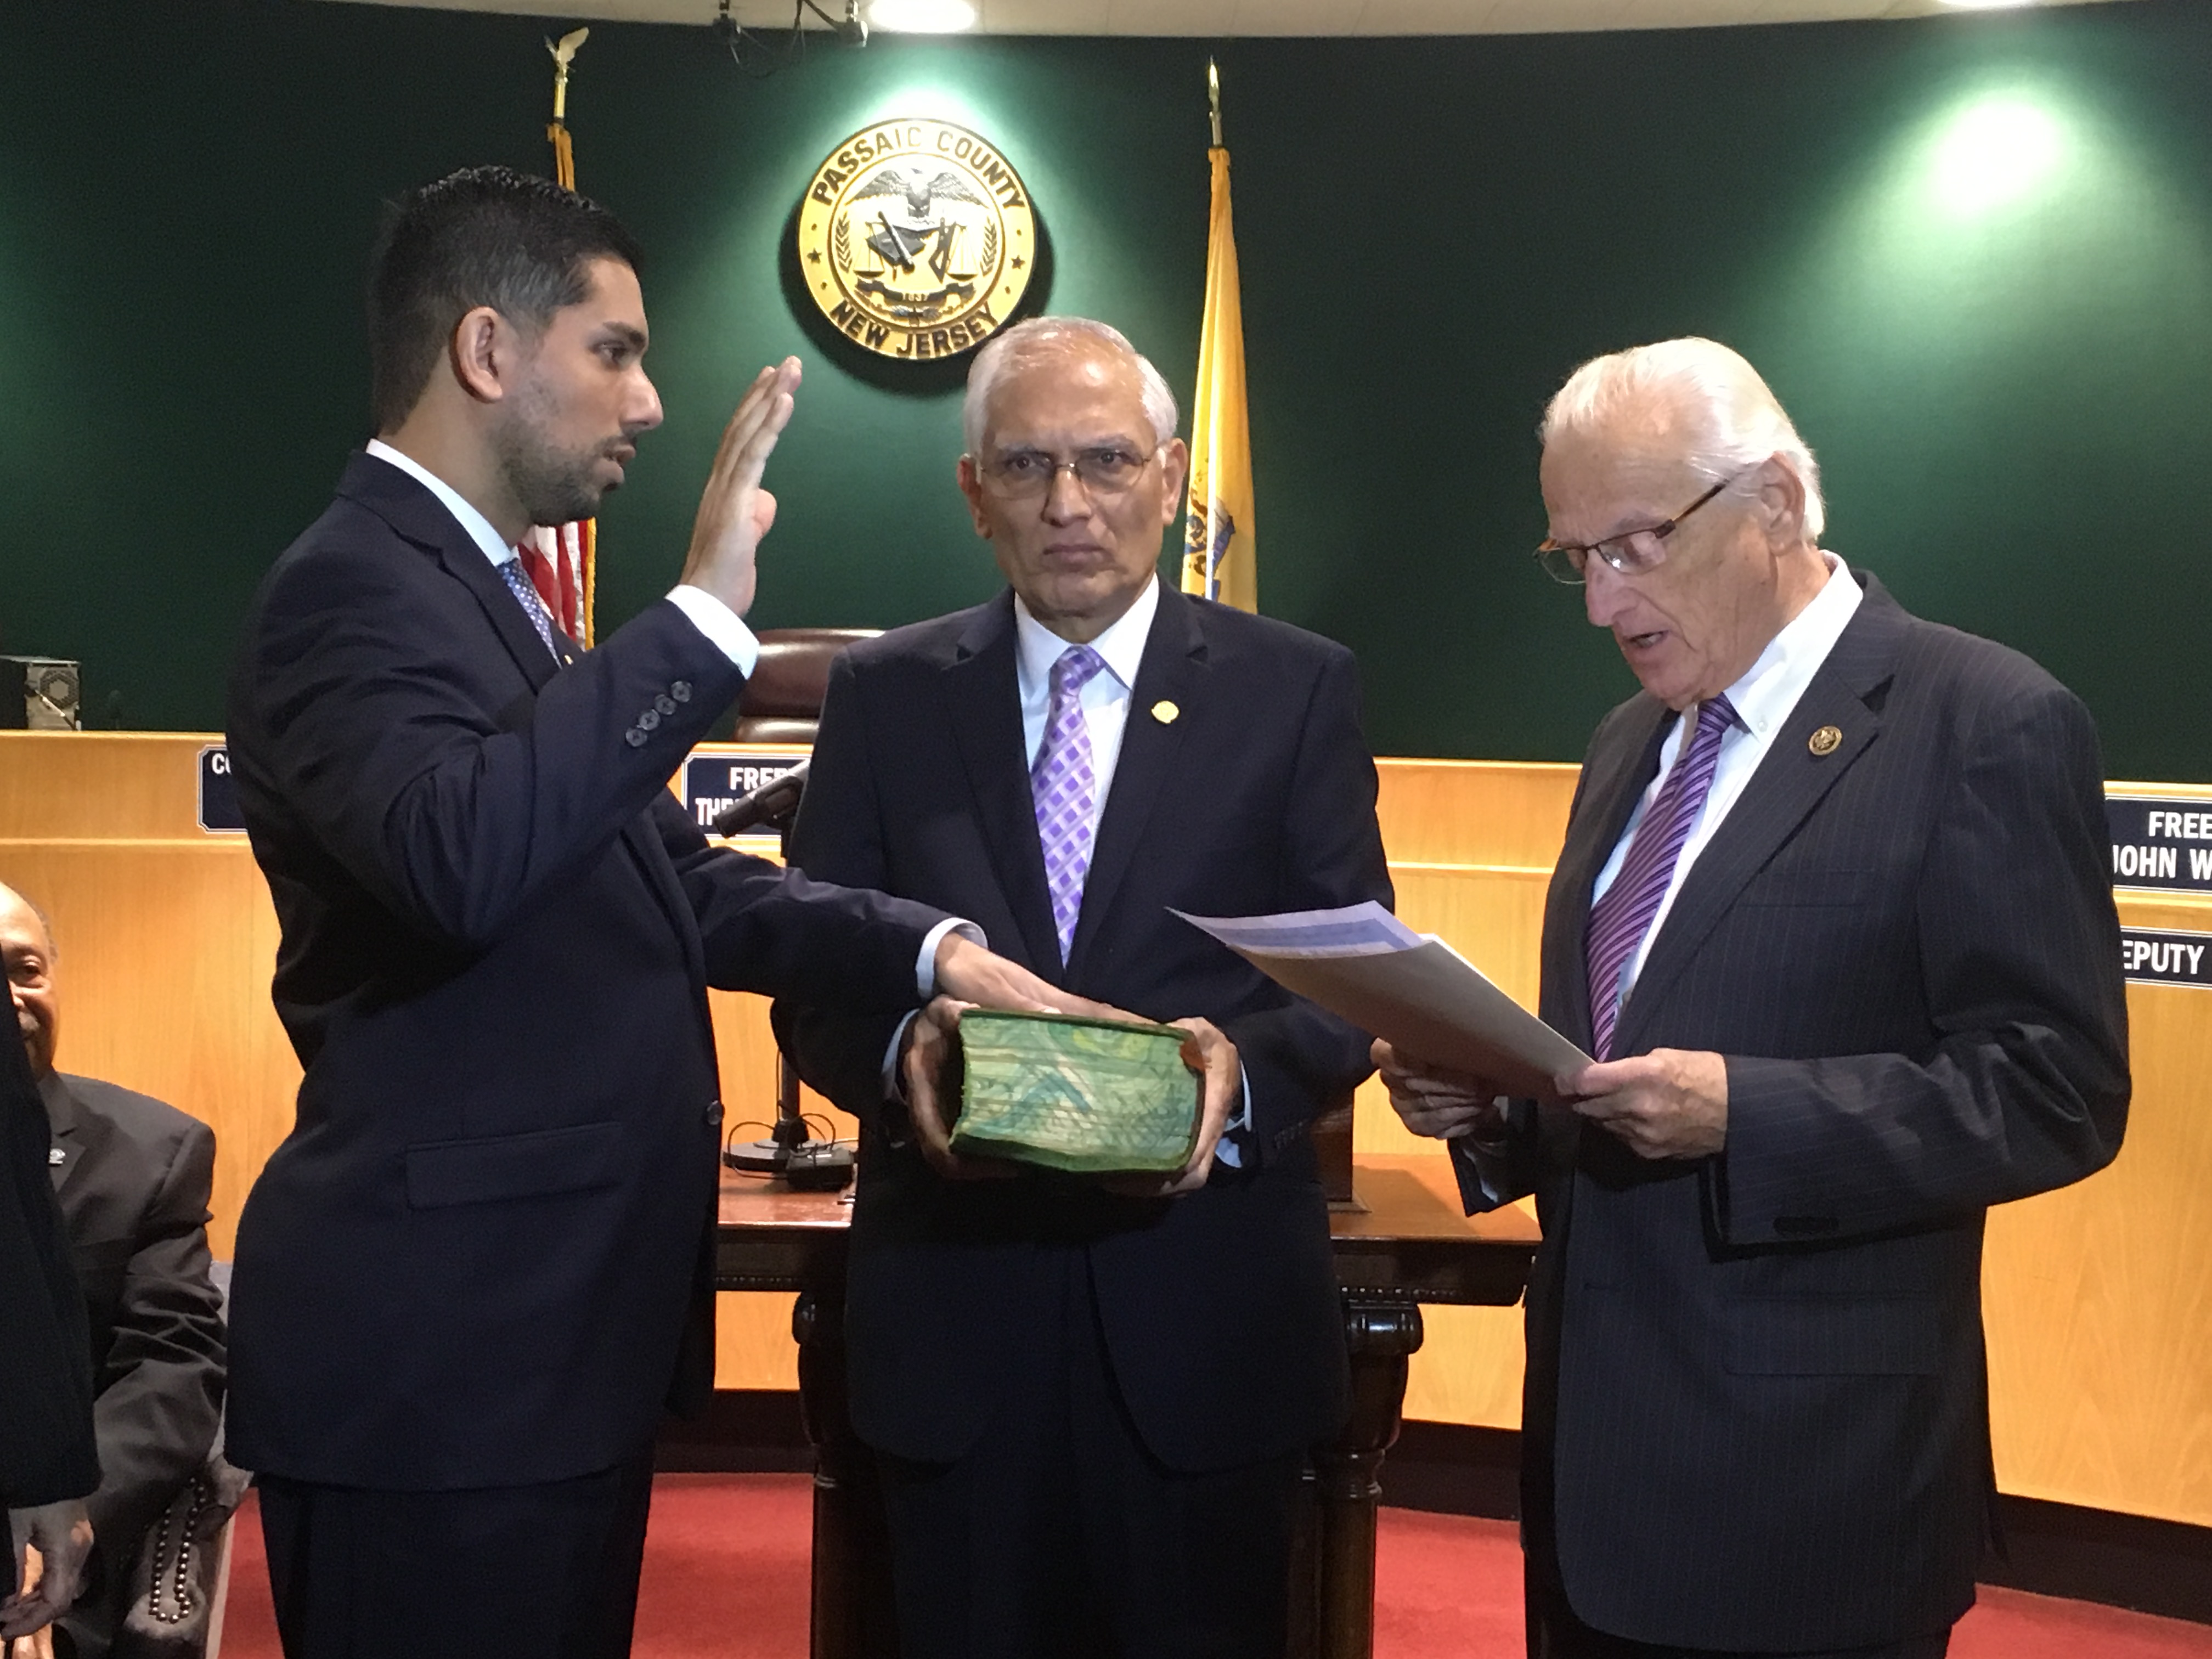 Akhter was sworn in by Congressman Pascrell as the new Passaic County freeholder.